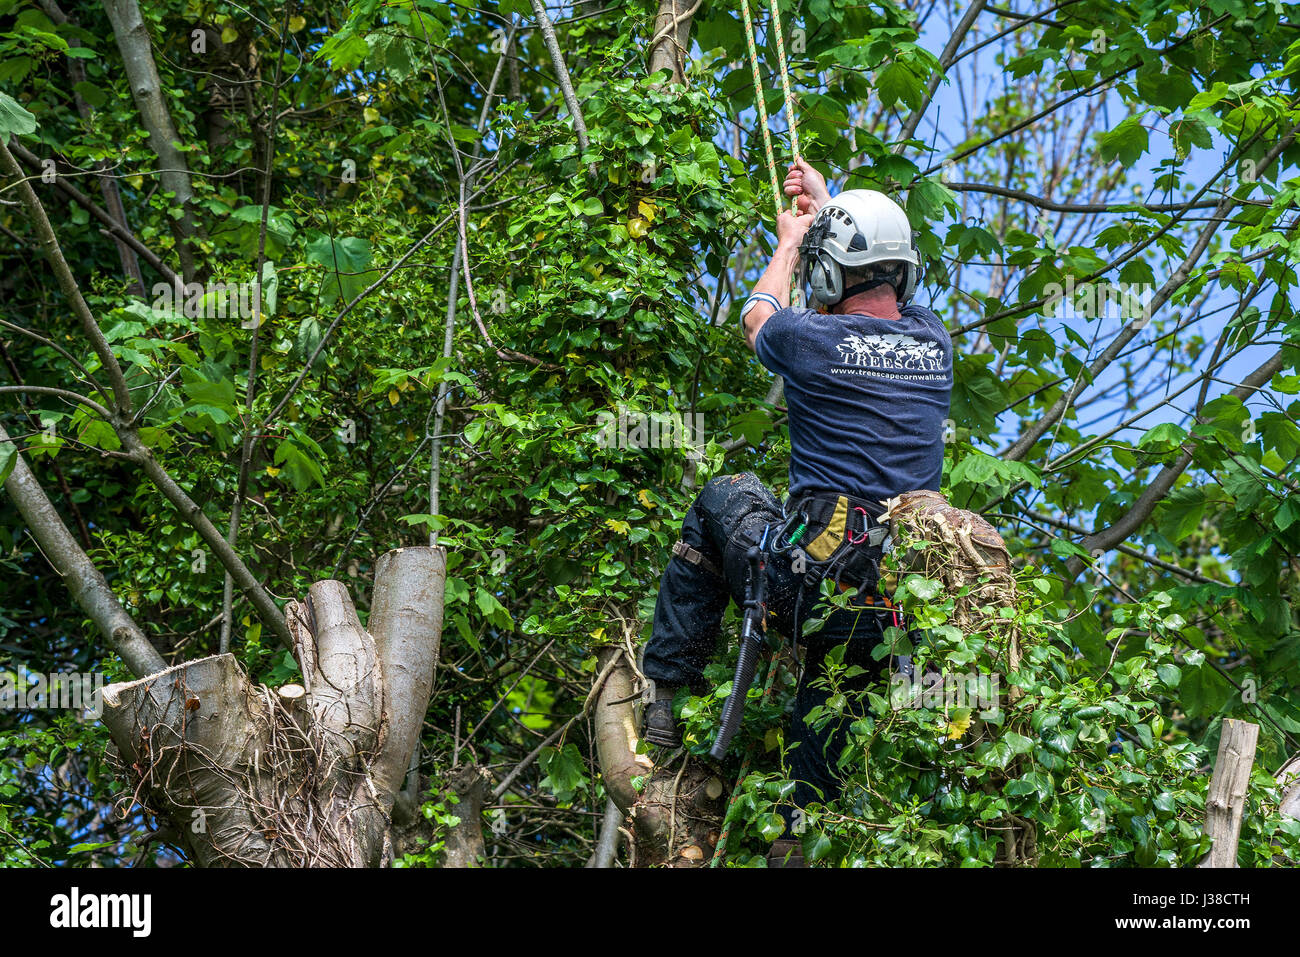 Tree surgeon Working at height Safety harness Roped Skilled worker Protective workwear Skilled work Arboriculturist Arborist Climbing Foliage Stock Photo